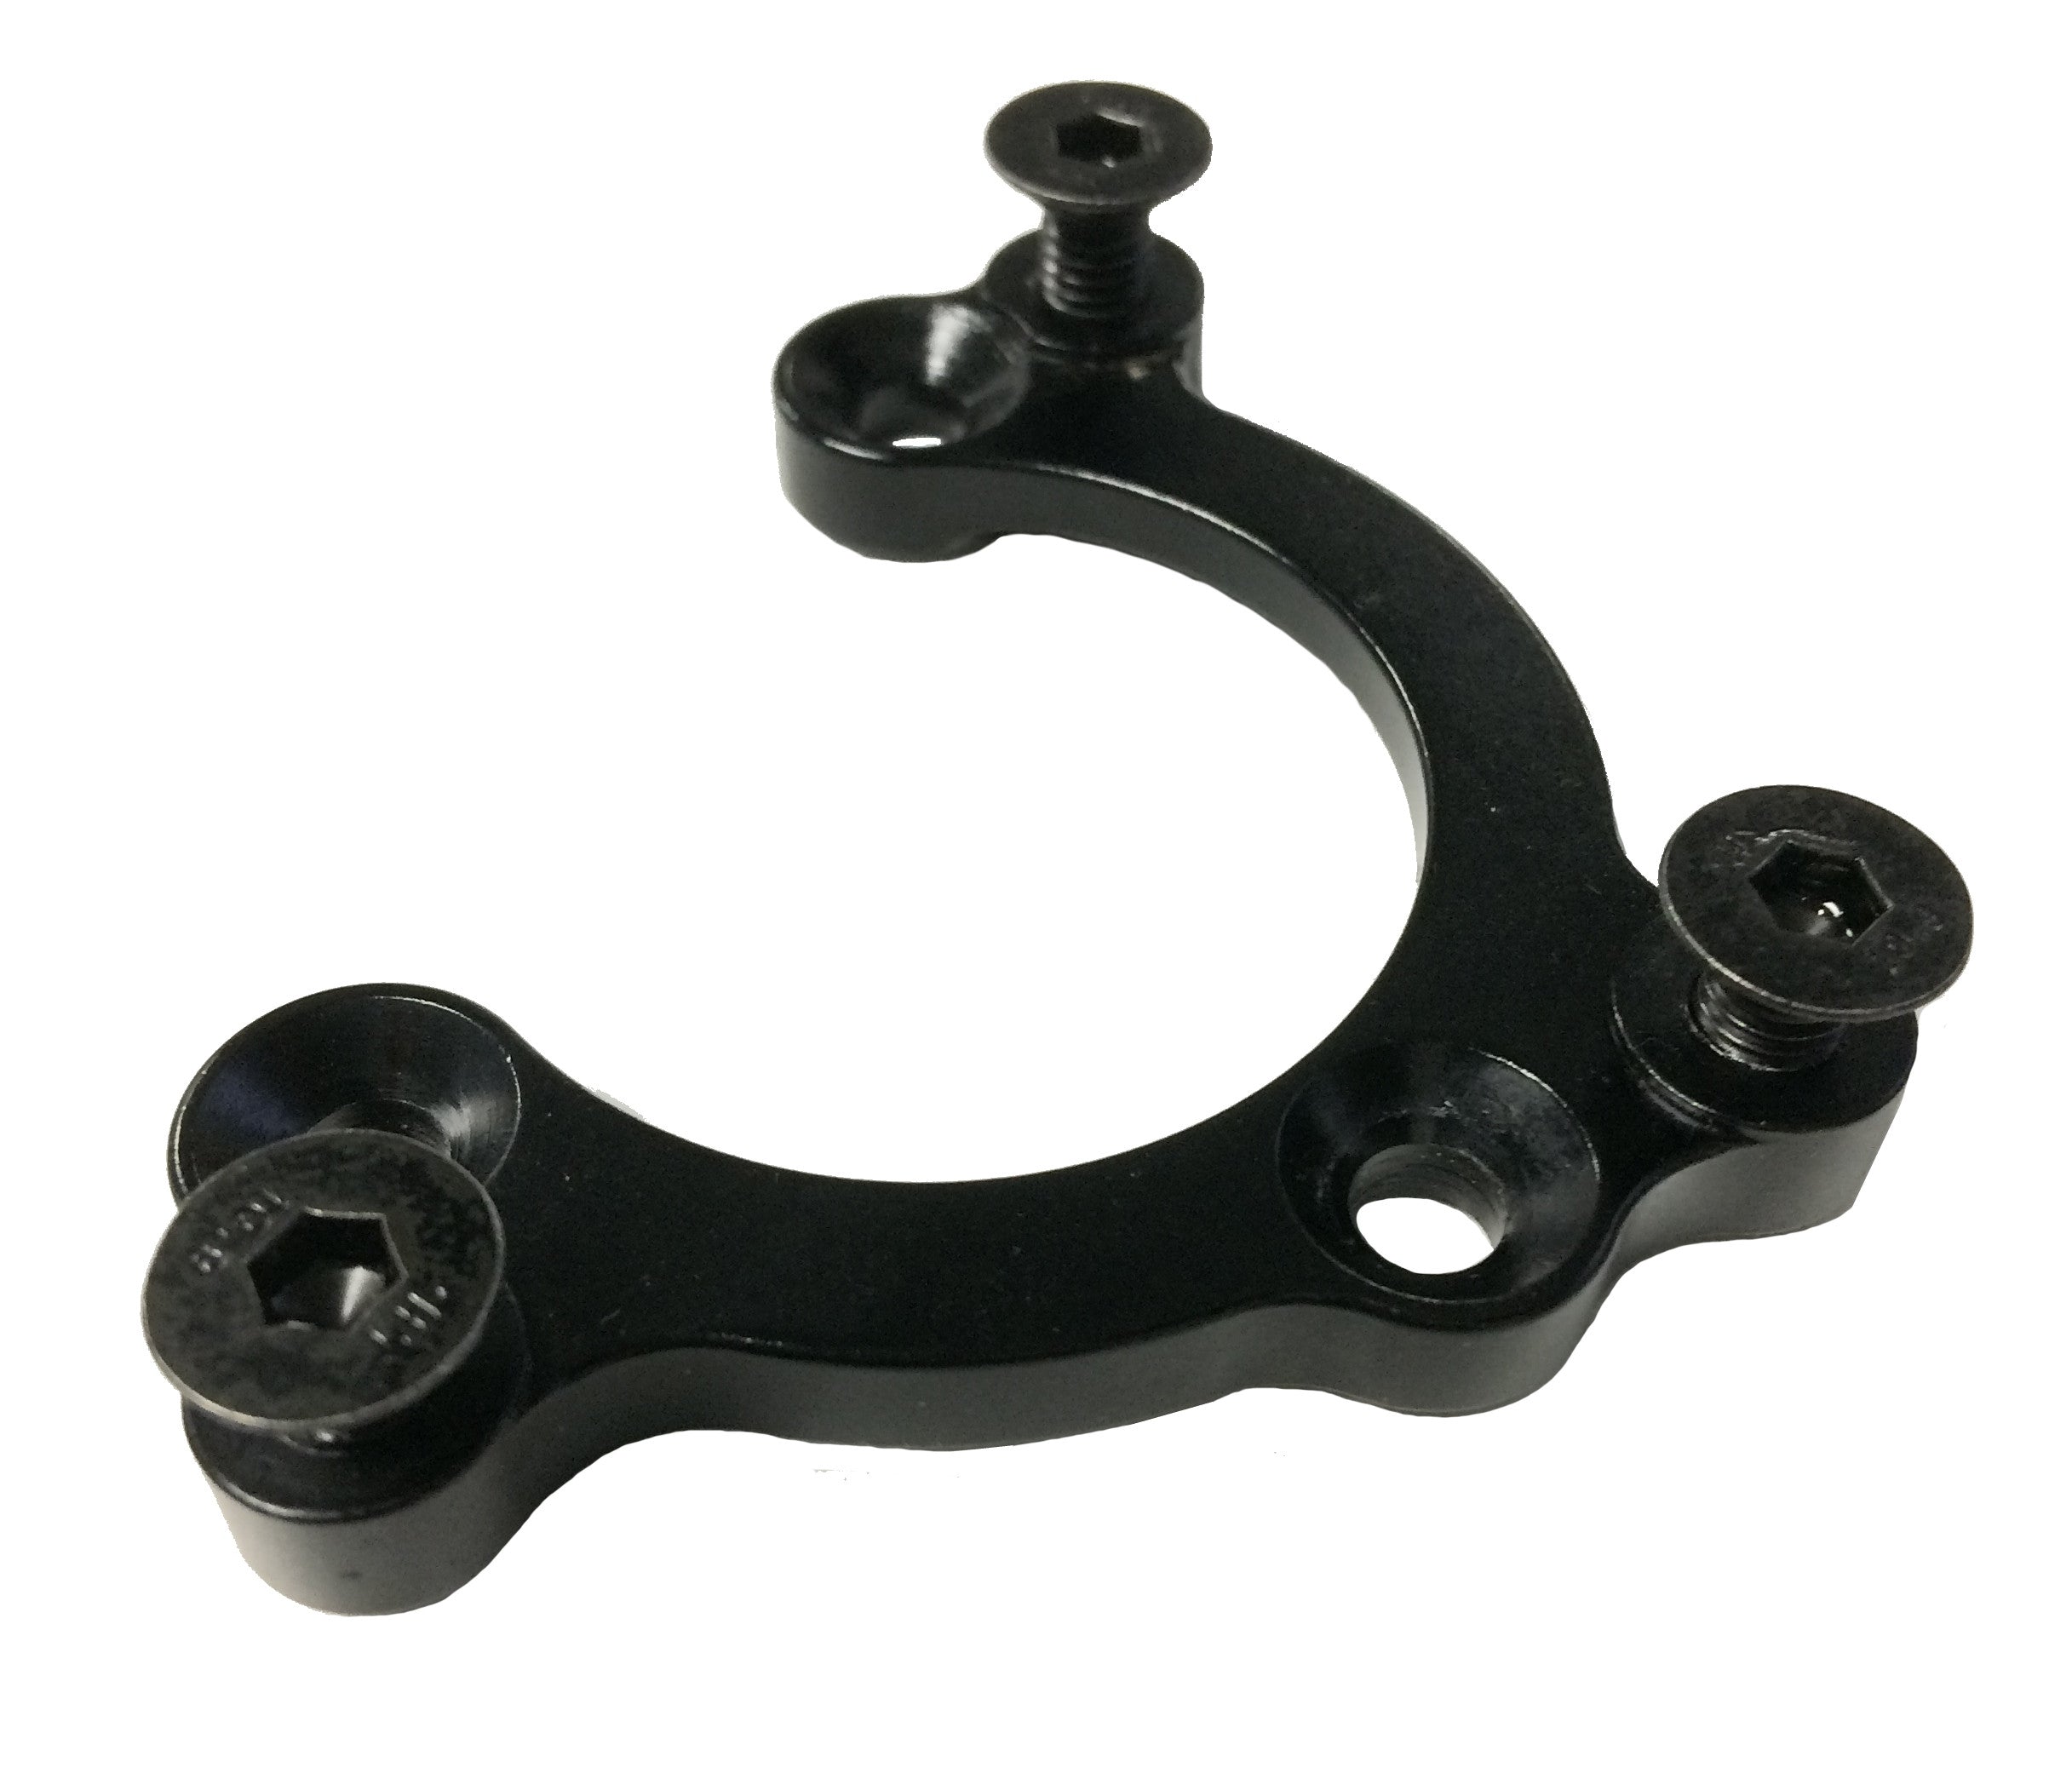 Knolly ISCG05 Chainguide Mount